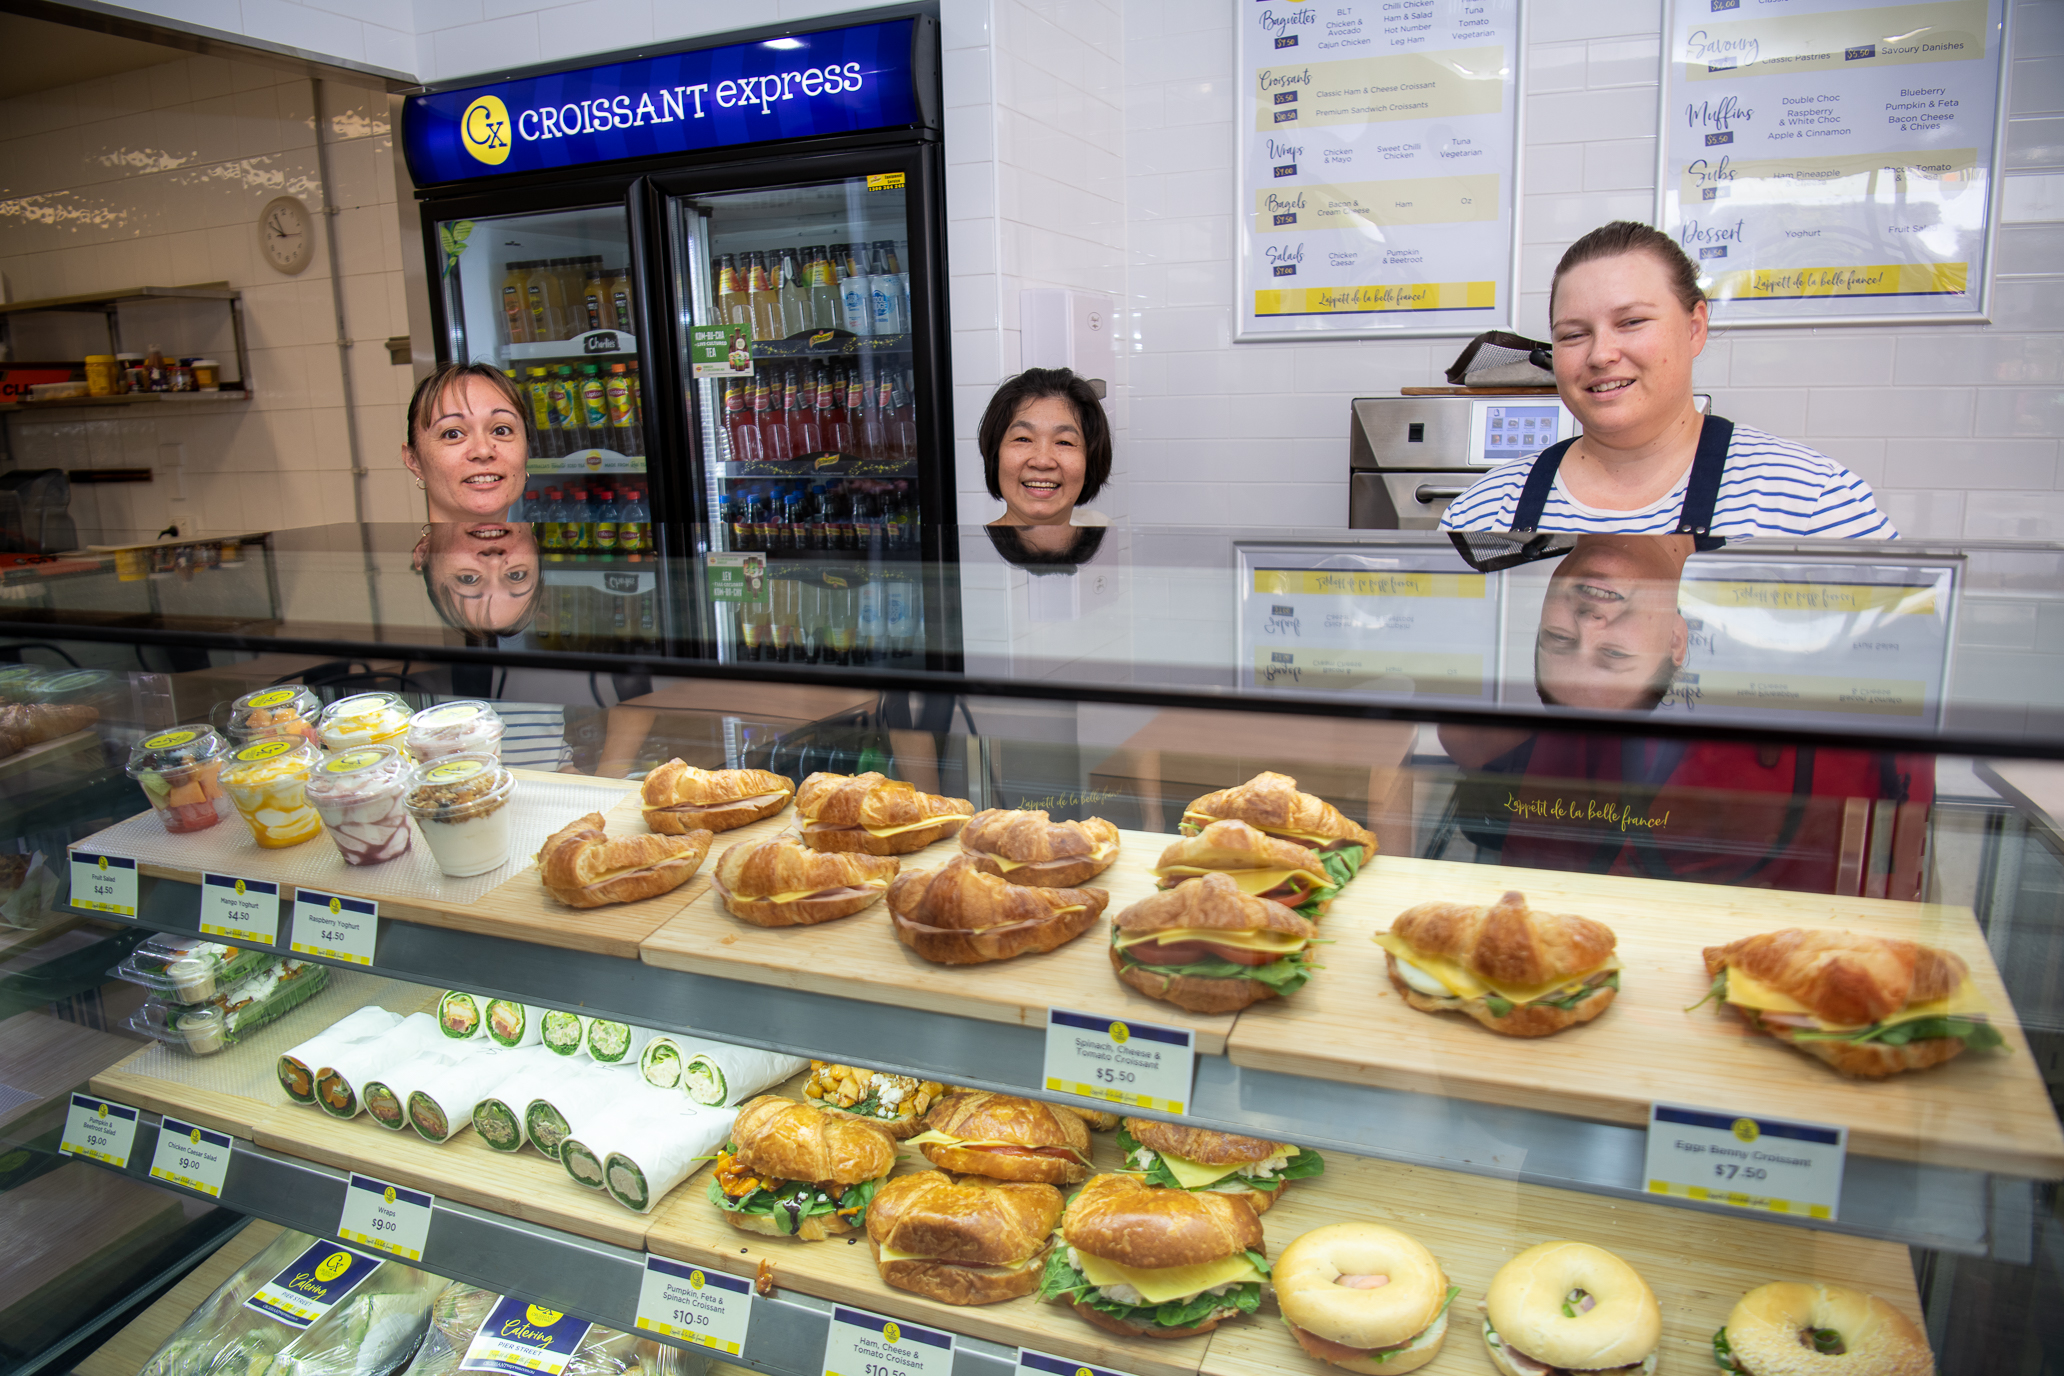 Three ladies standing behind the counter at Croissant Express